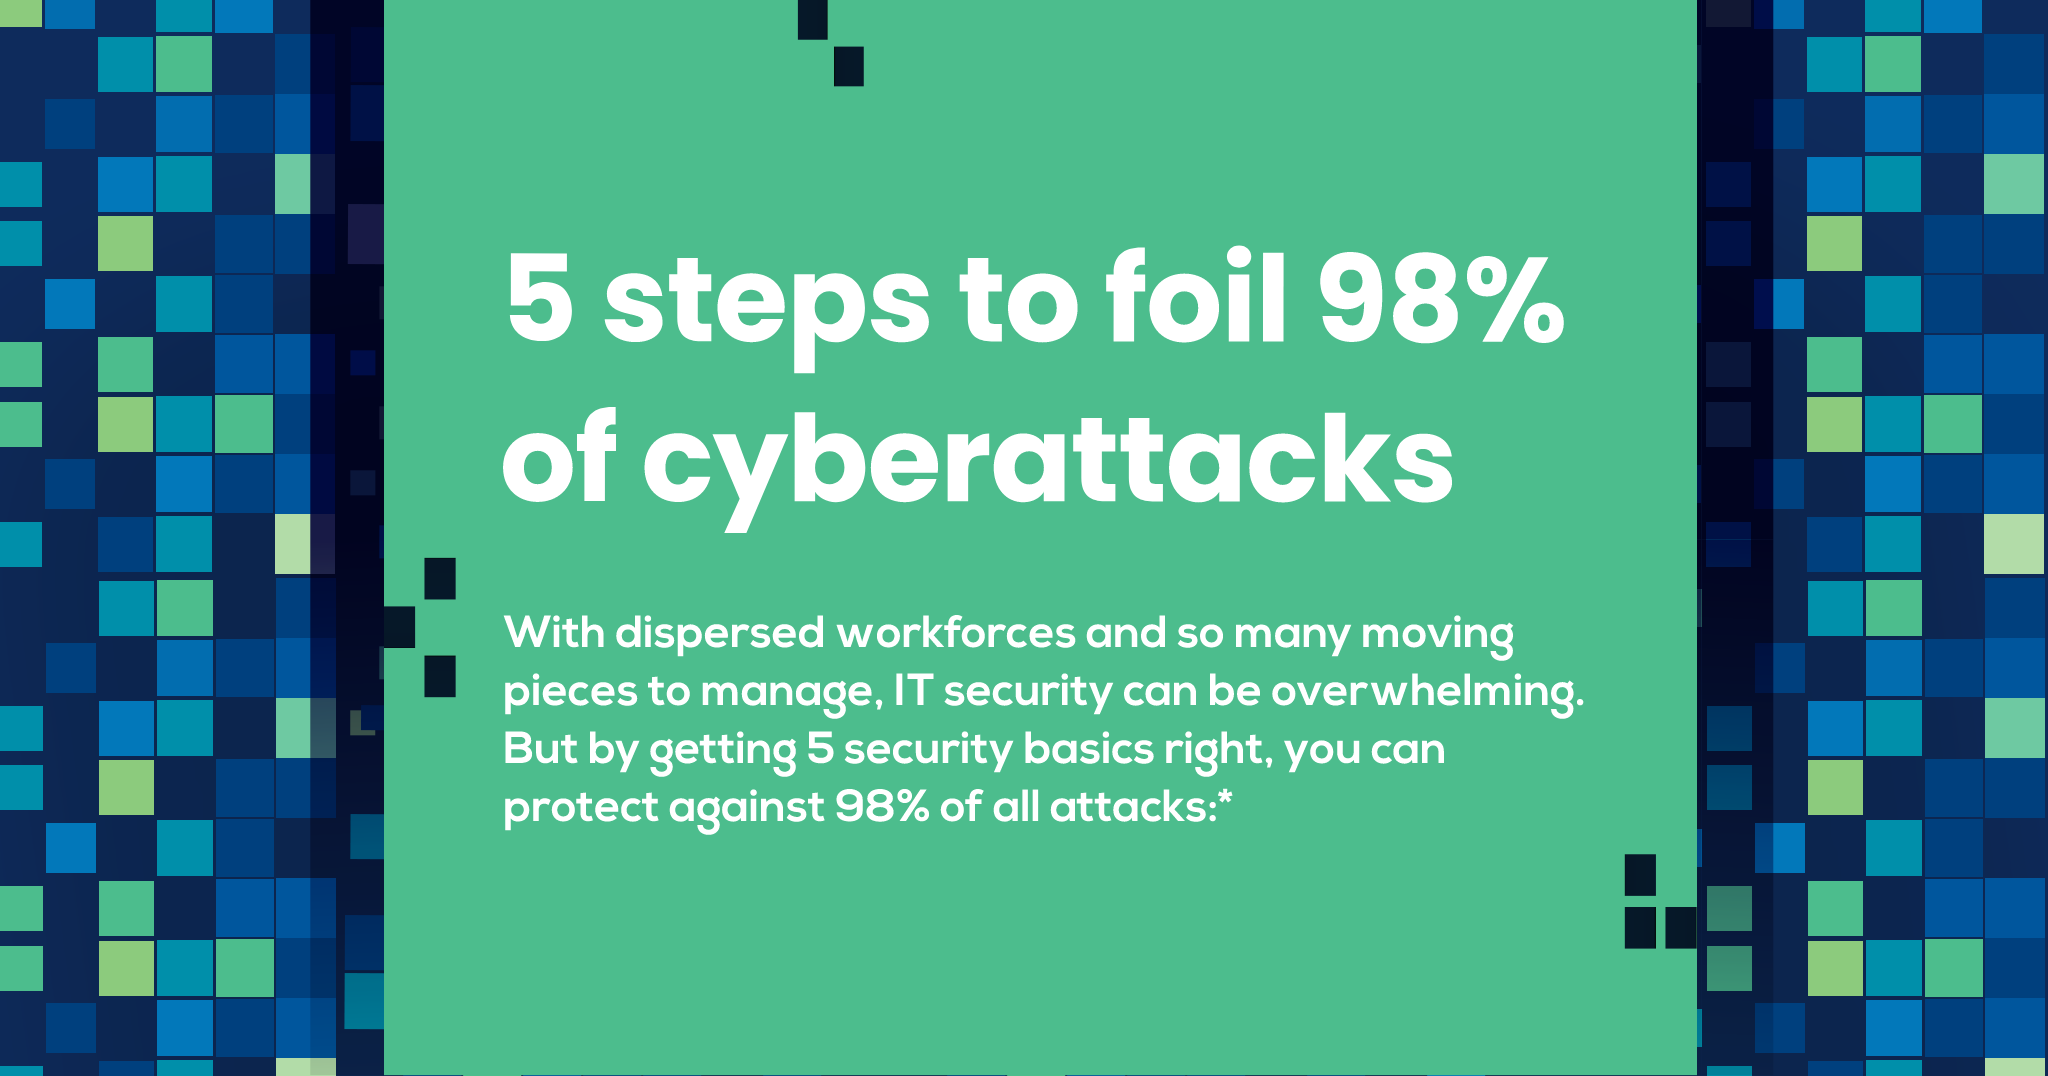 steps to foil of cyberattacks